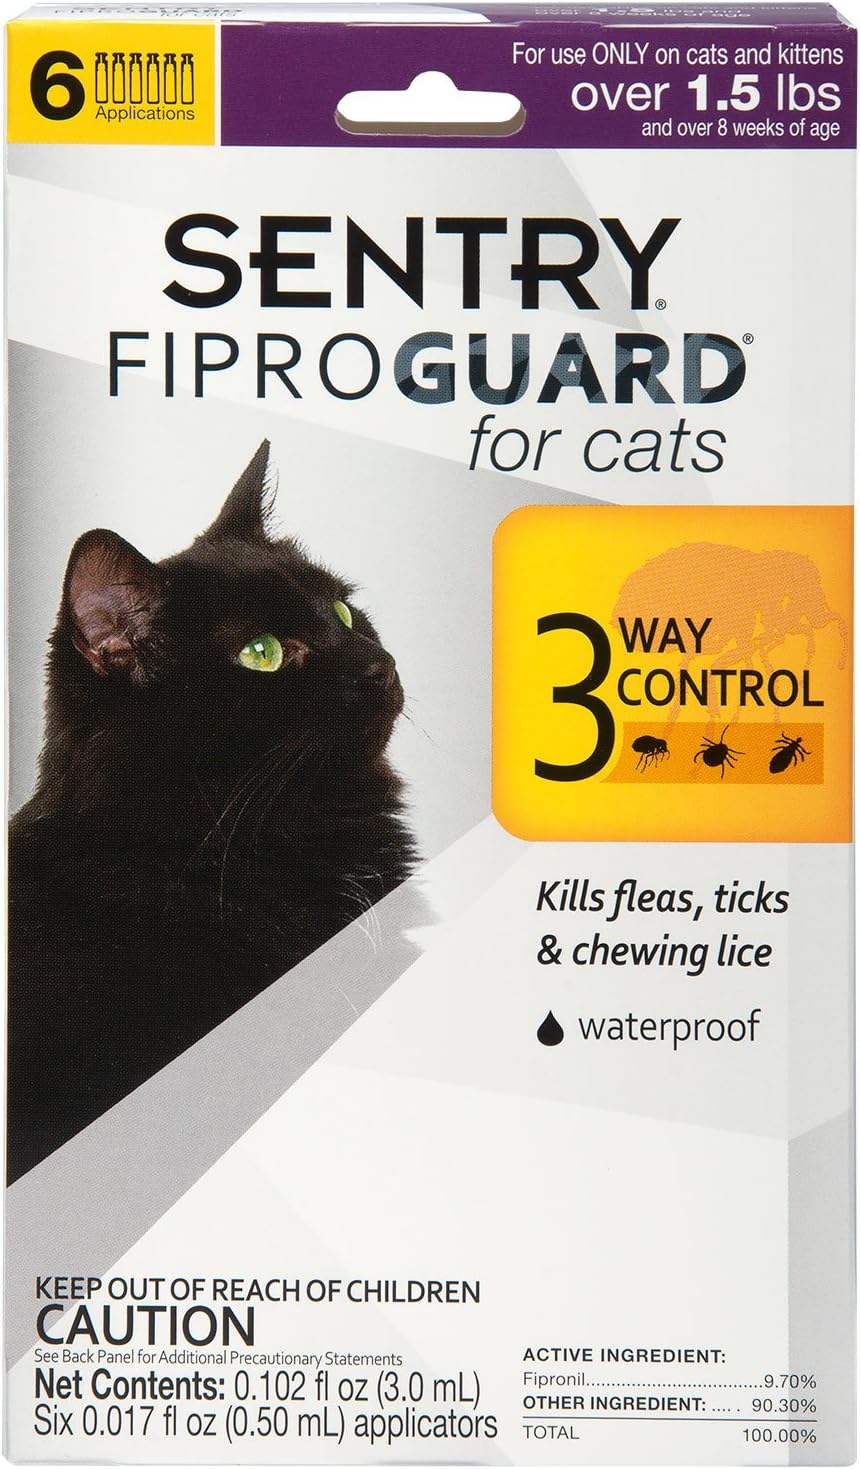 SENTRY Fiproguard for Cats, Flea and Tick Prevention for Cats (1.5 Pounds and Over), Includes 6 Month Supply of Topical Flea Treatments